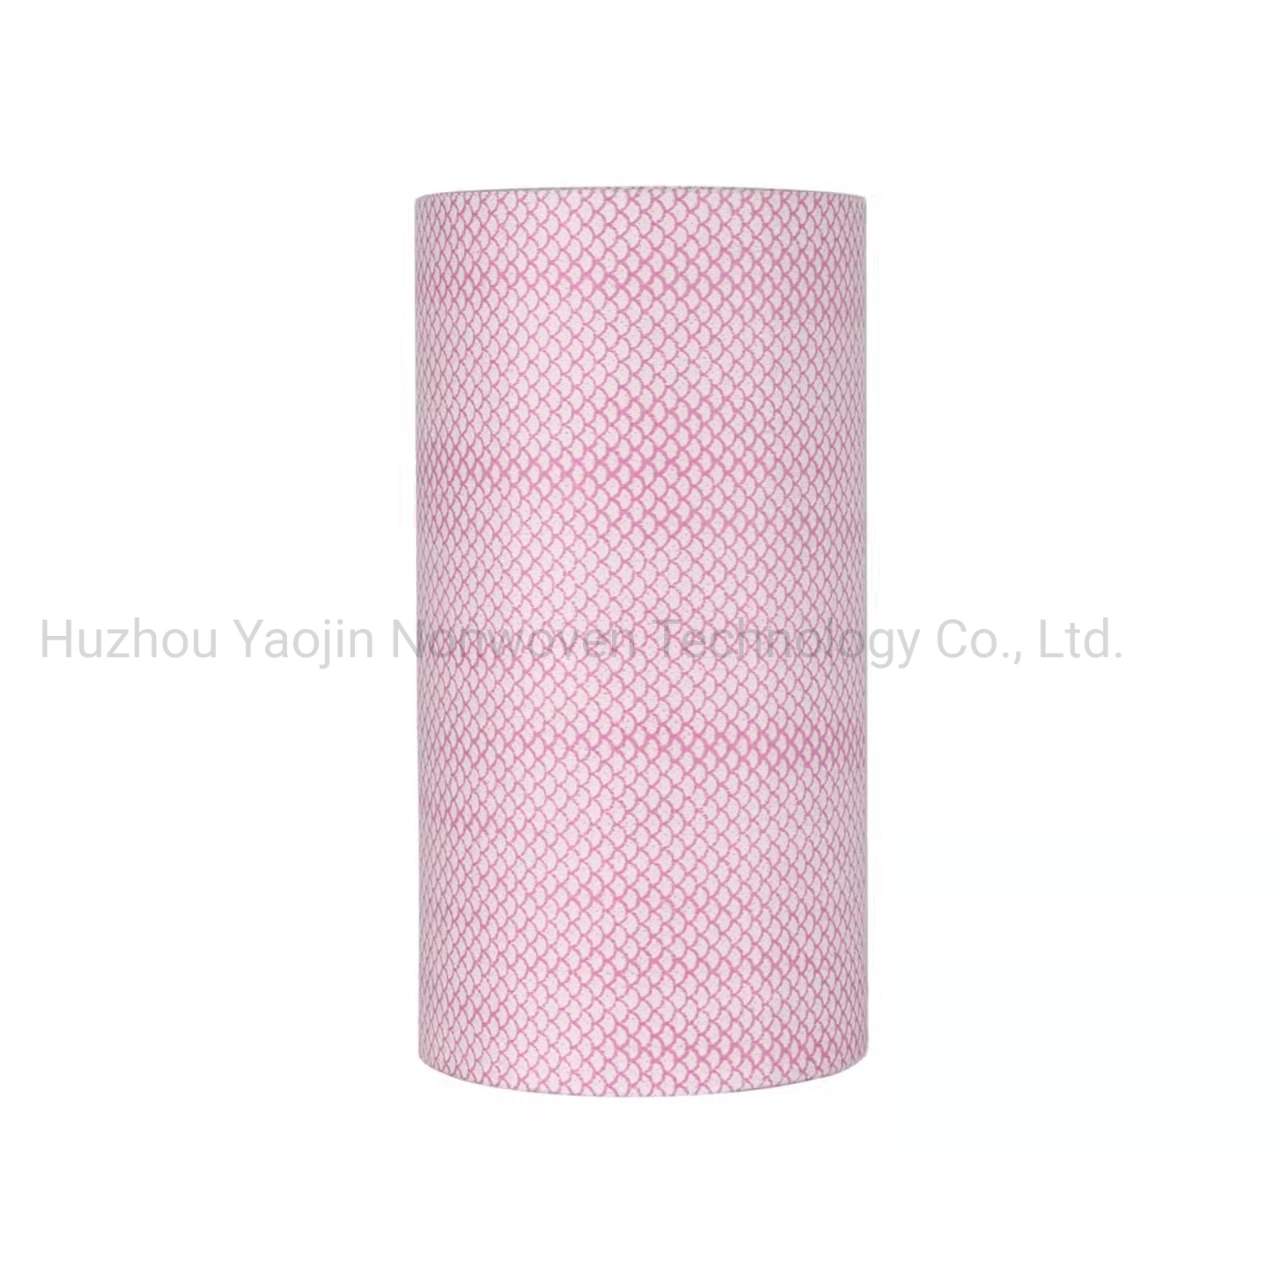 China Manufacturer Wholesale/Supplier Heavy Duty Industry or Home and Kitchen Dry Wipes